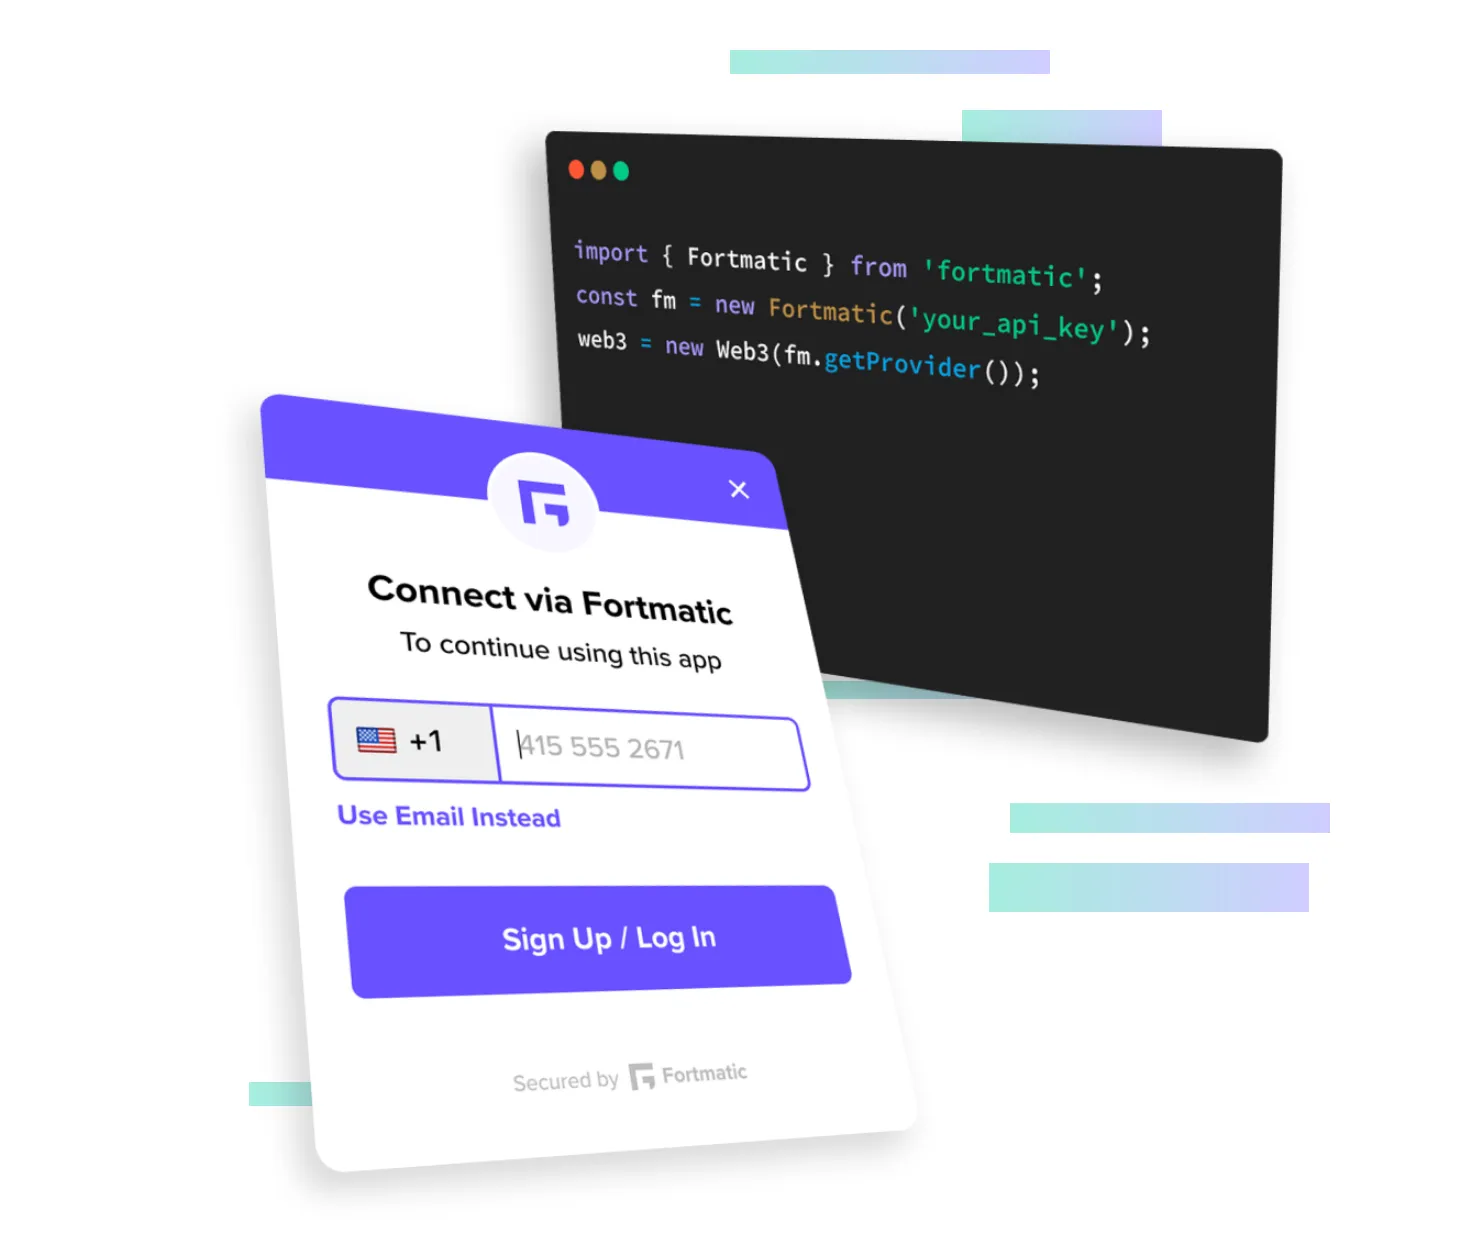 Fortmatic lets you sign into dapps